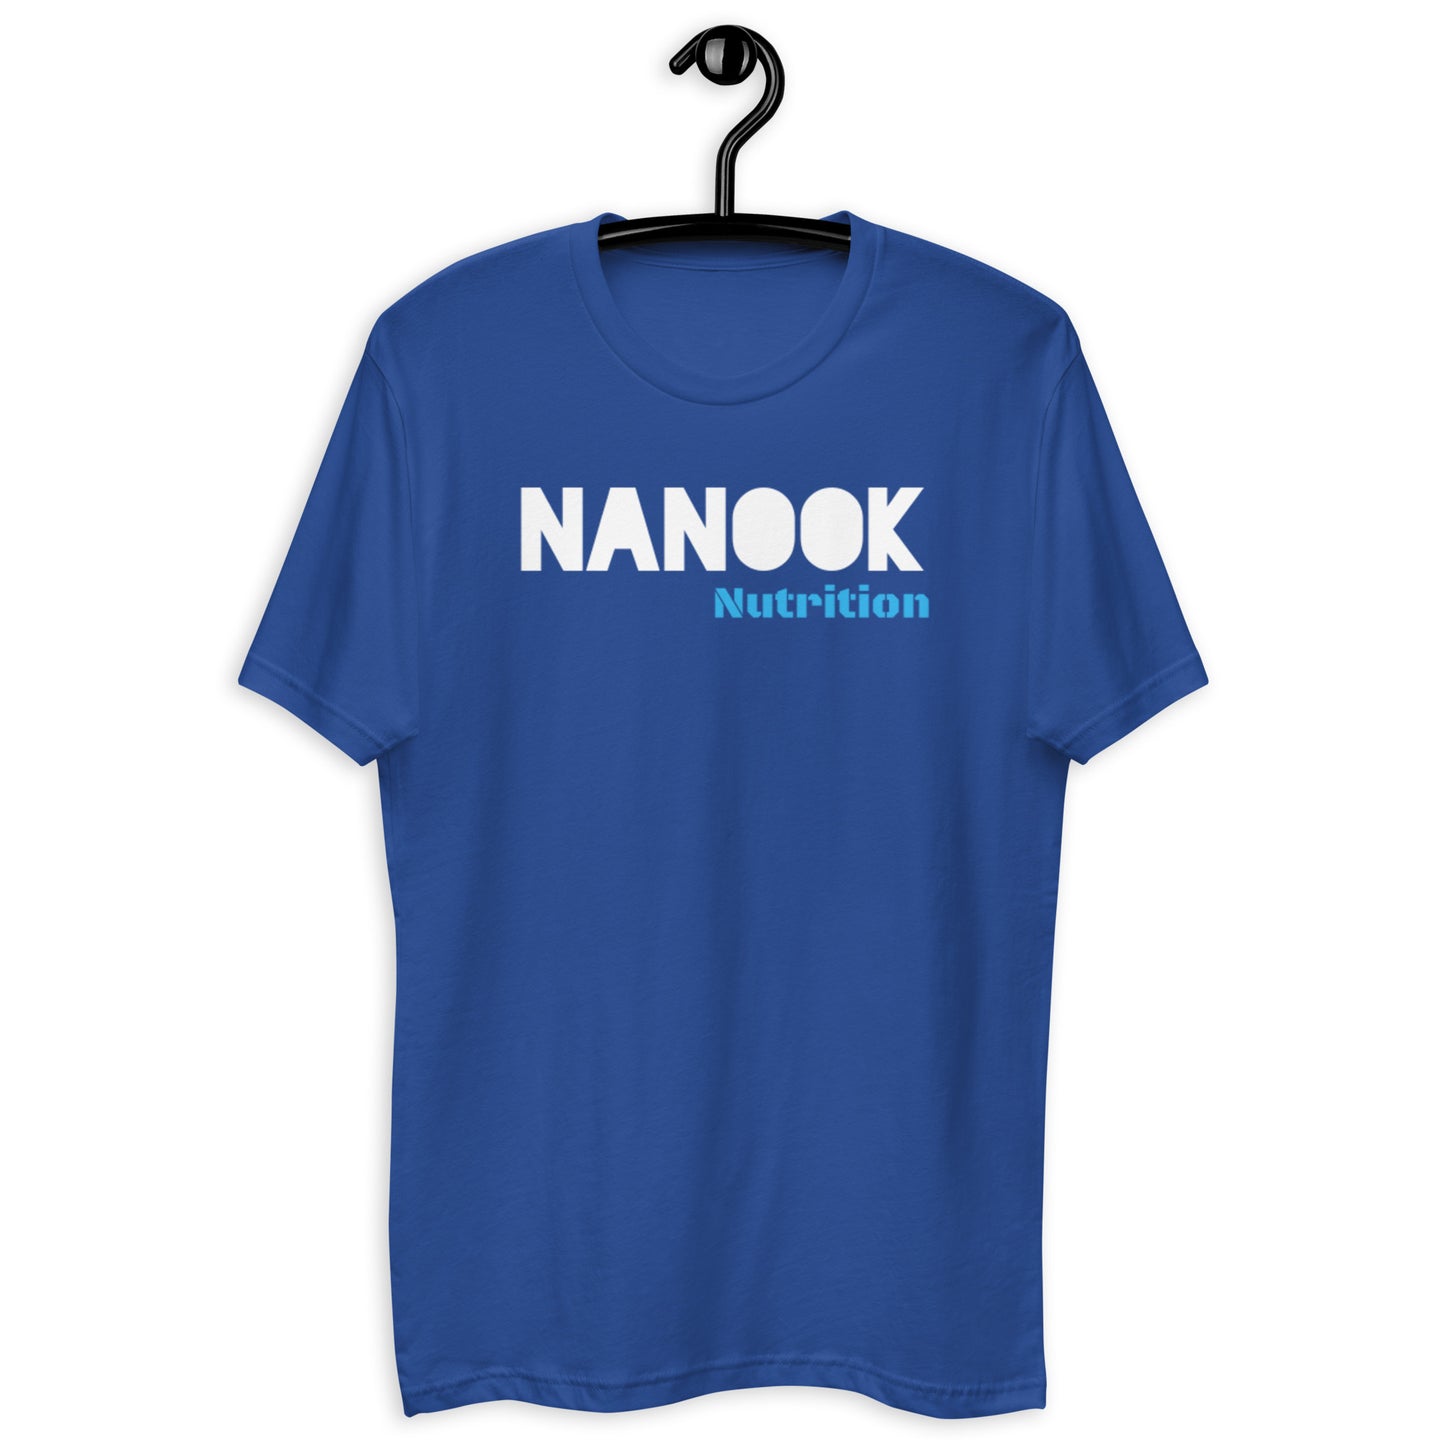 Nanook Fitted Short Sleeve T-shirt (Variant 1)